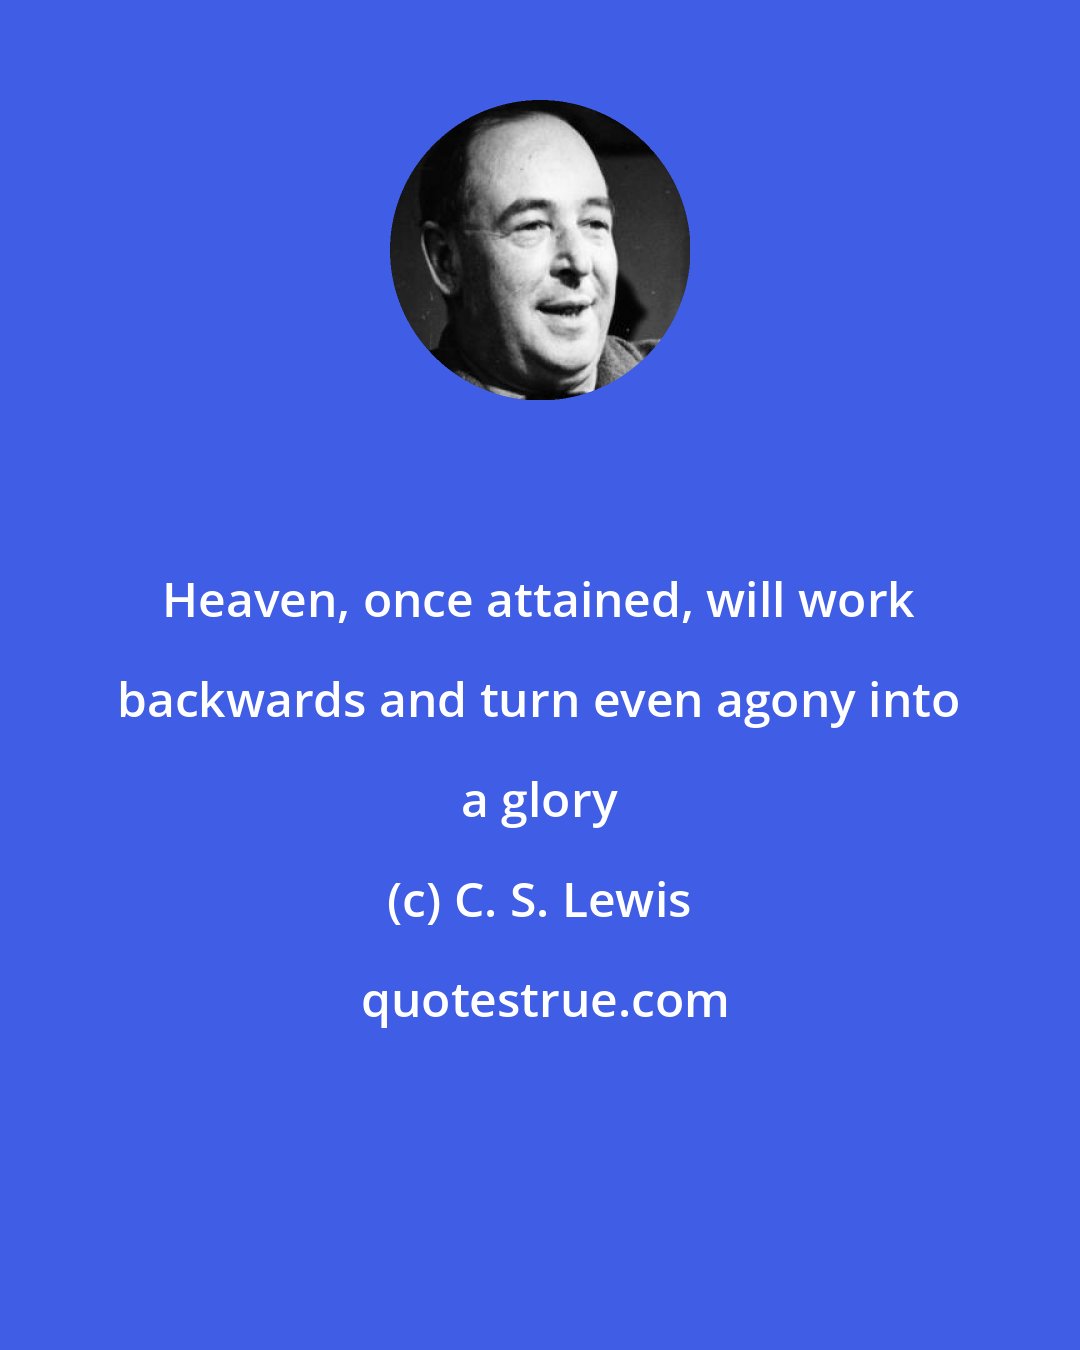 C. S. Lewis: Heaven, once attained, will work backwards and turn even agony into a glory